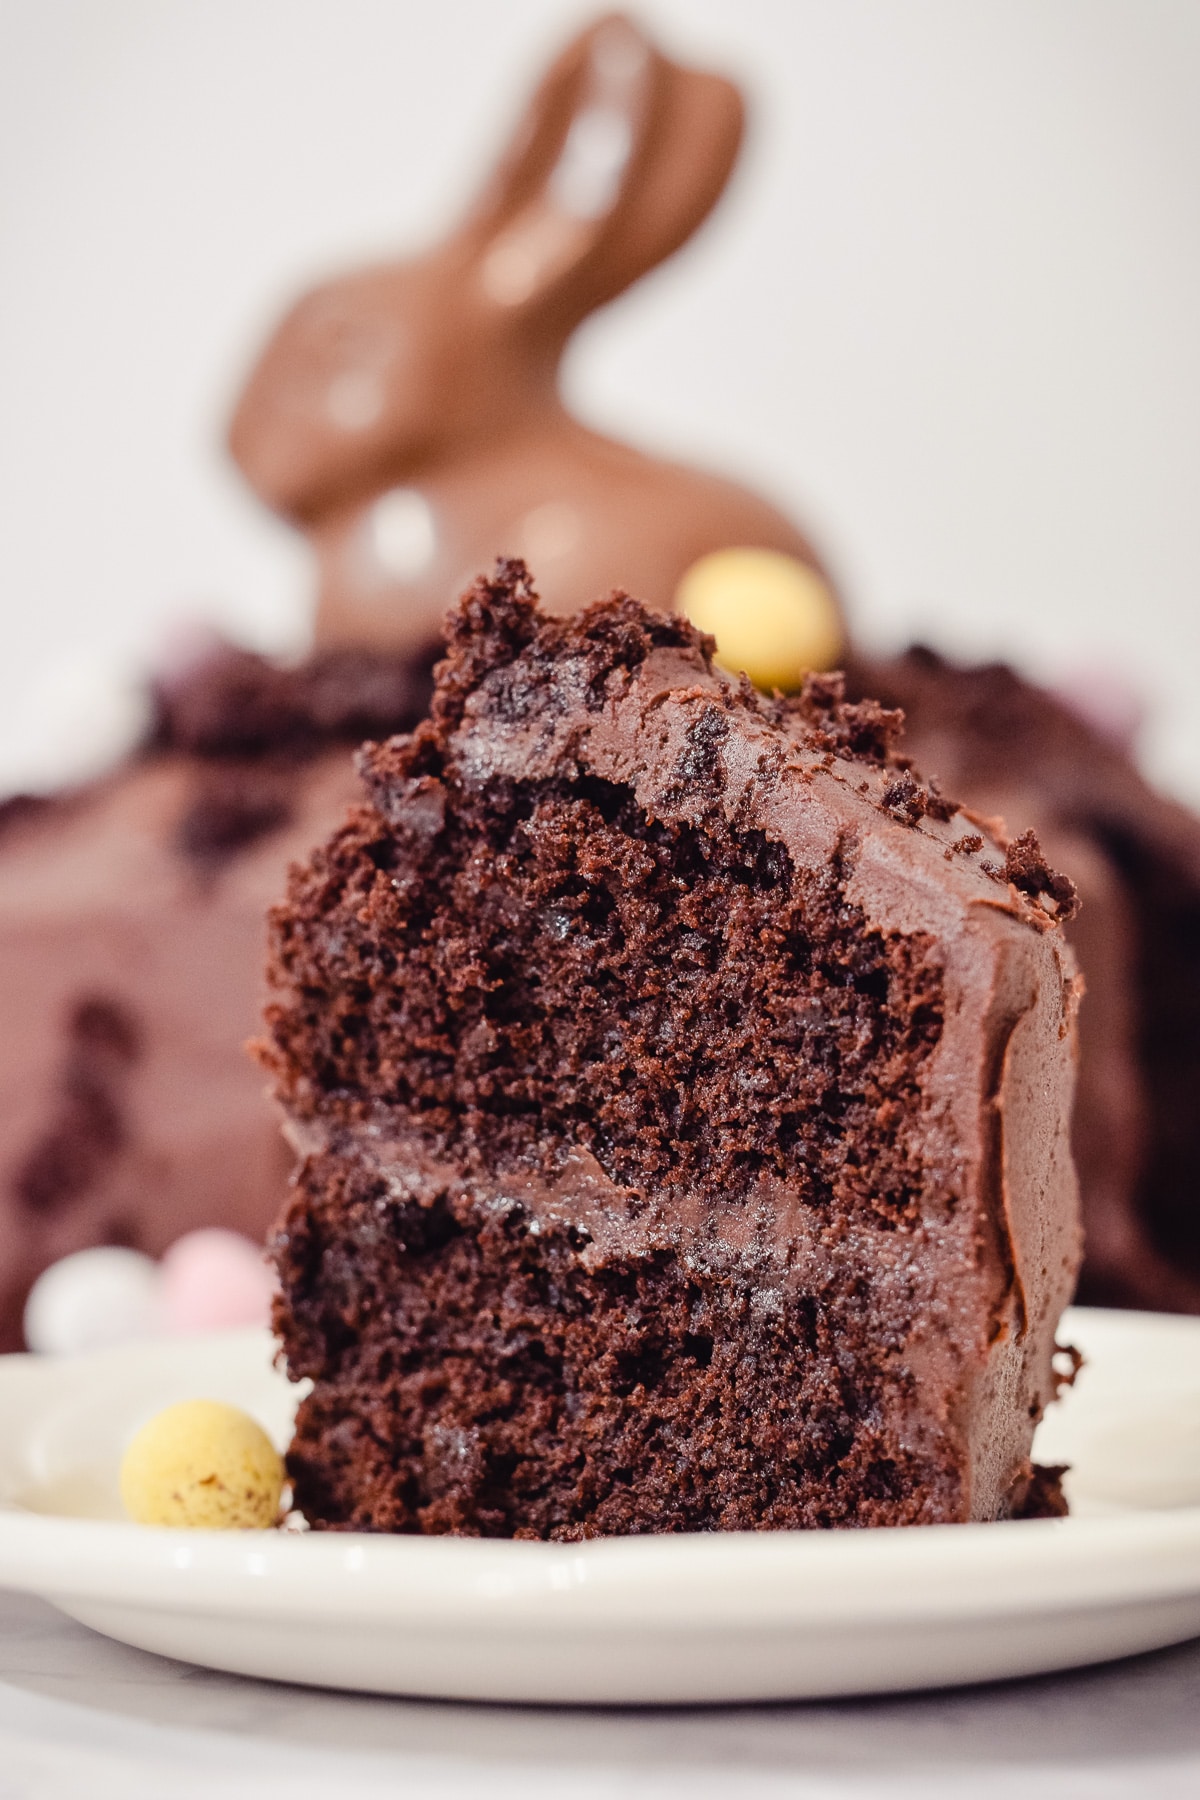 Slice of moist Easter chocolate mud cake with a chocolate rabbit in a cake in the background